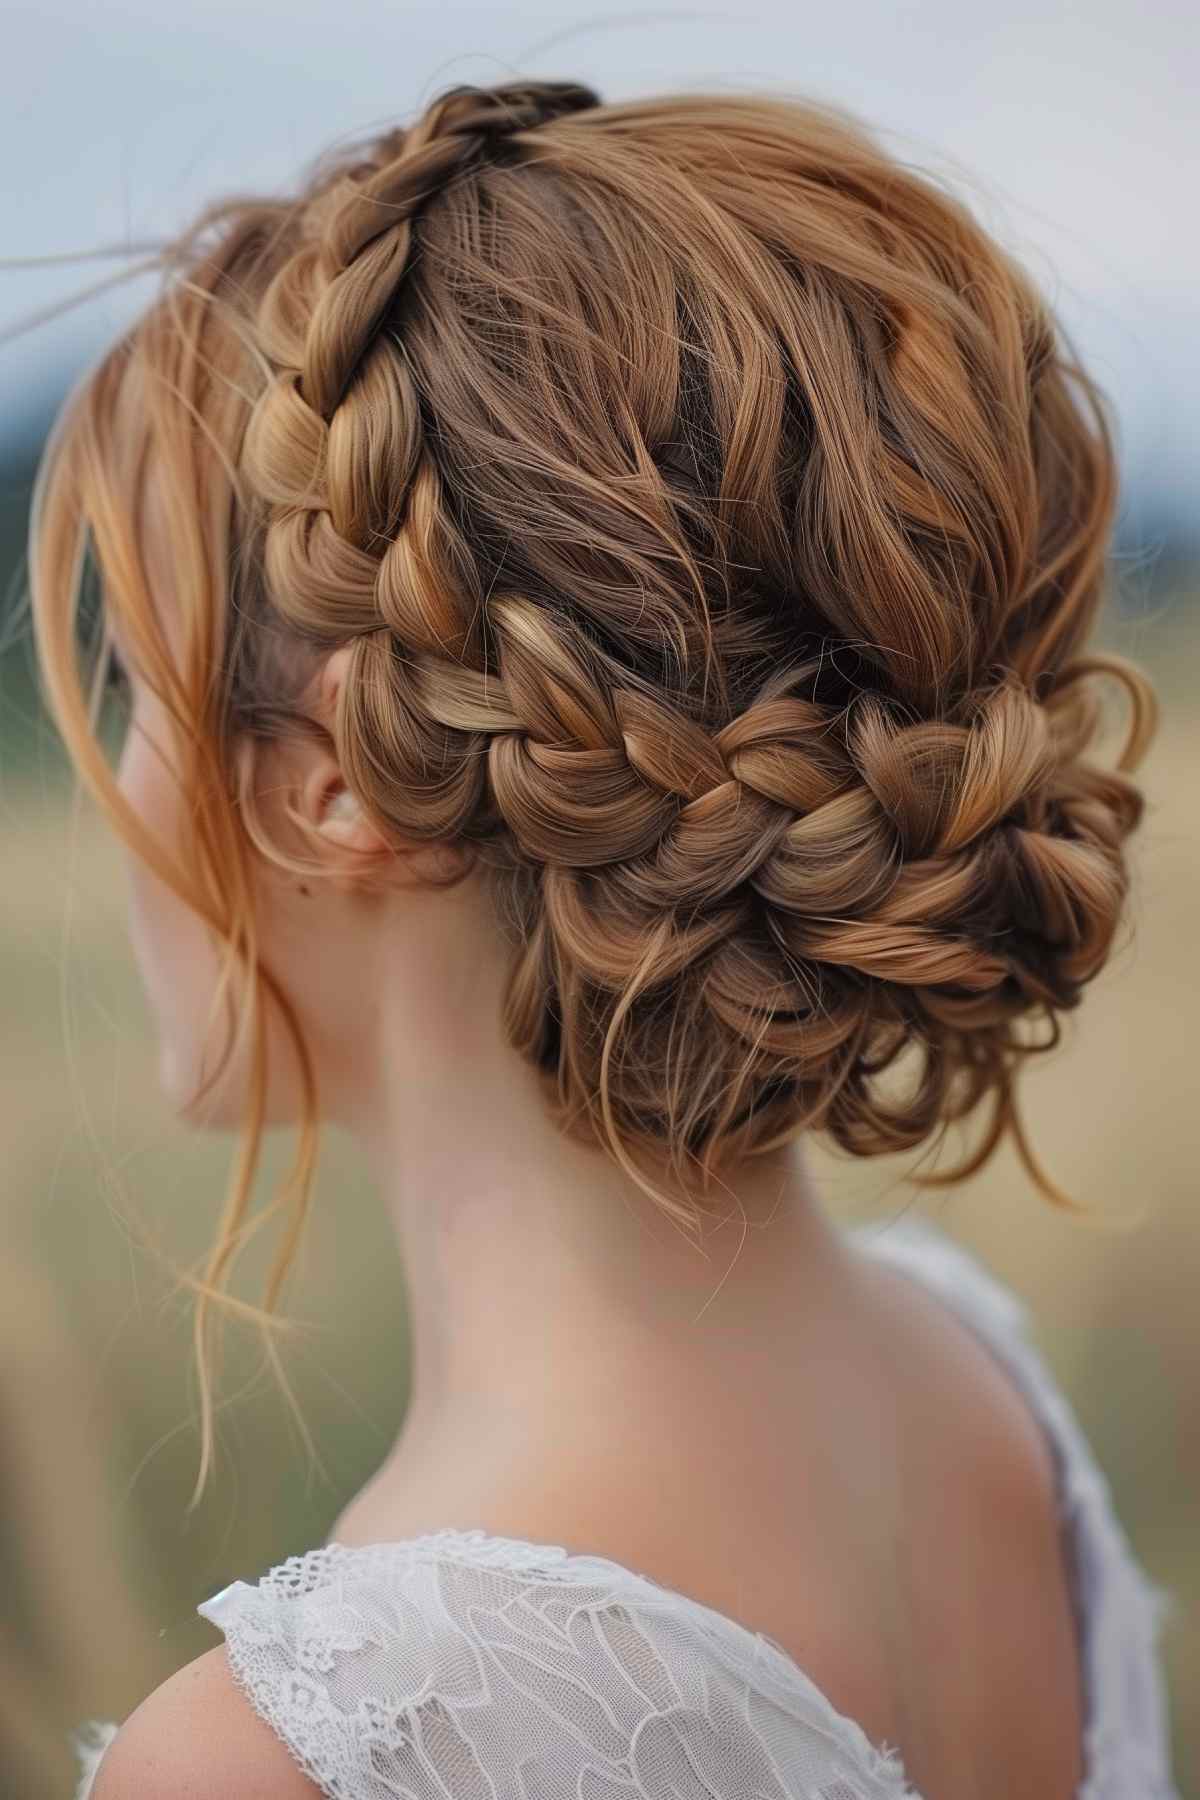 Intricate braided crown hairstyle on medium-length blonde hair, perfect for a wedding.